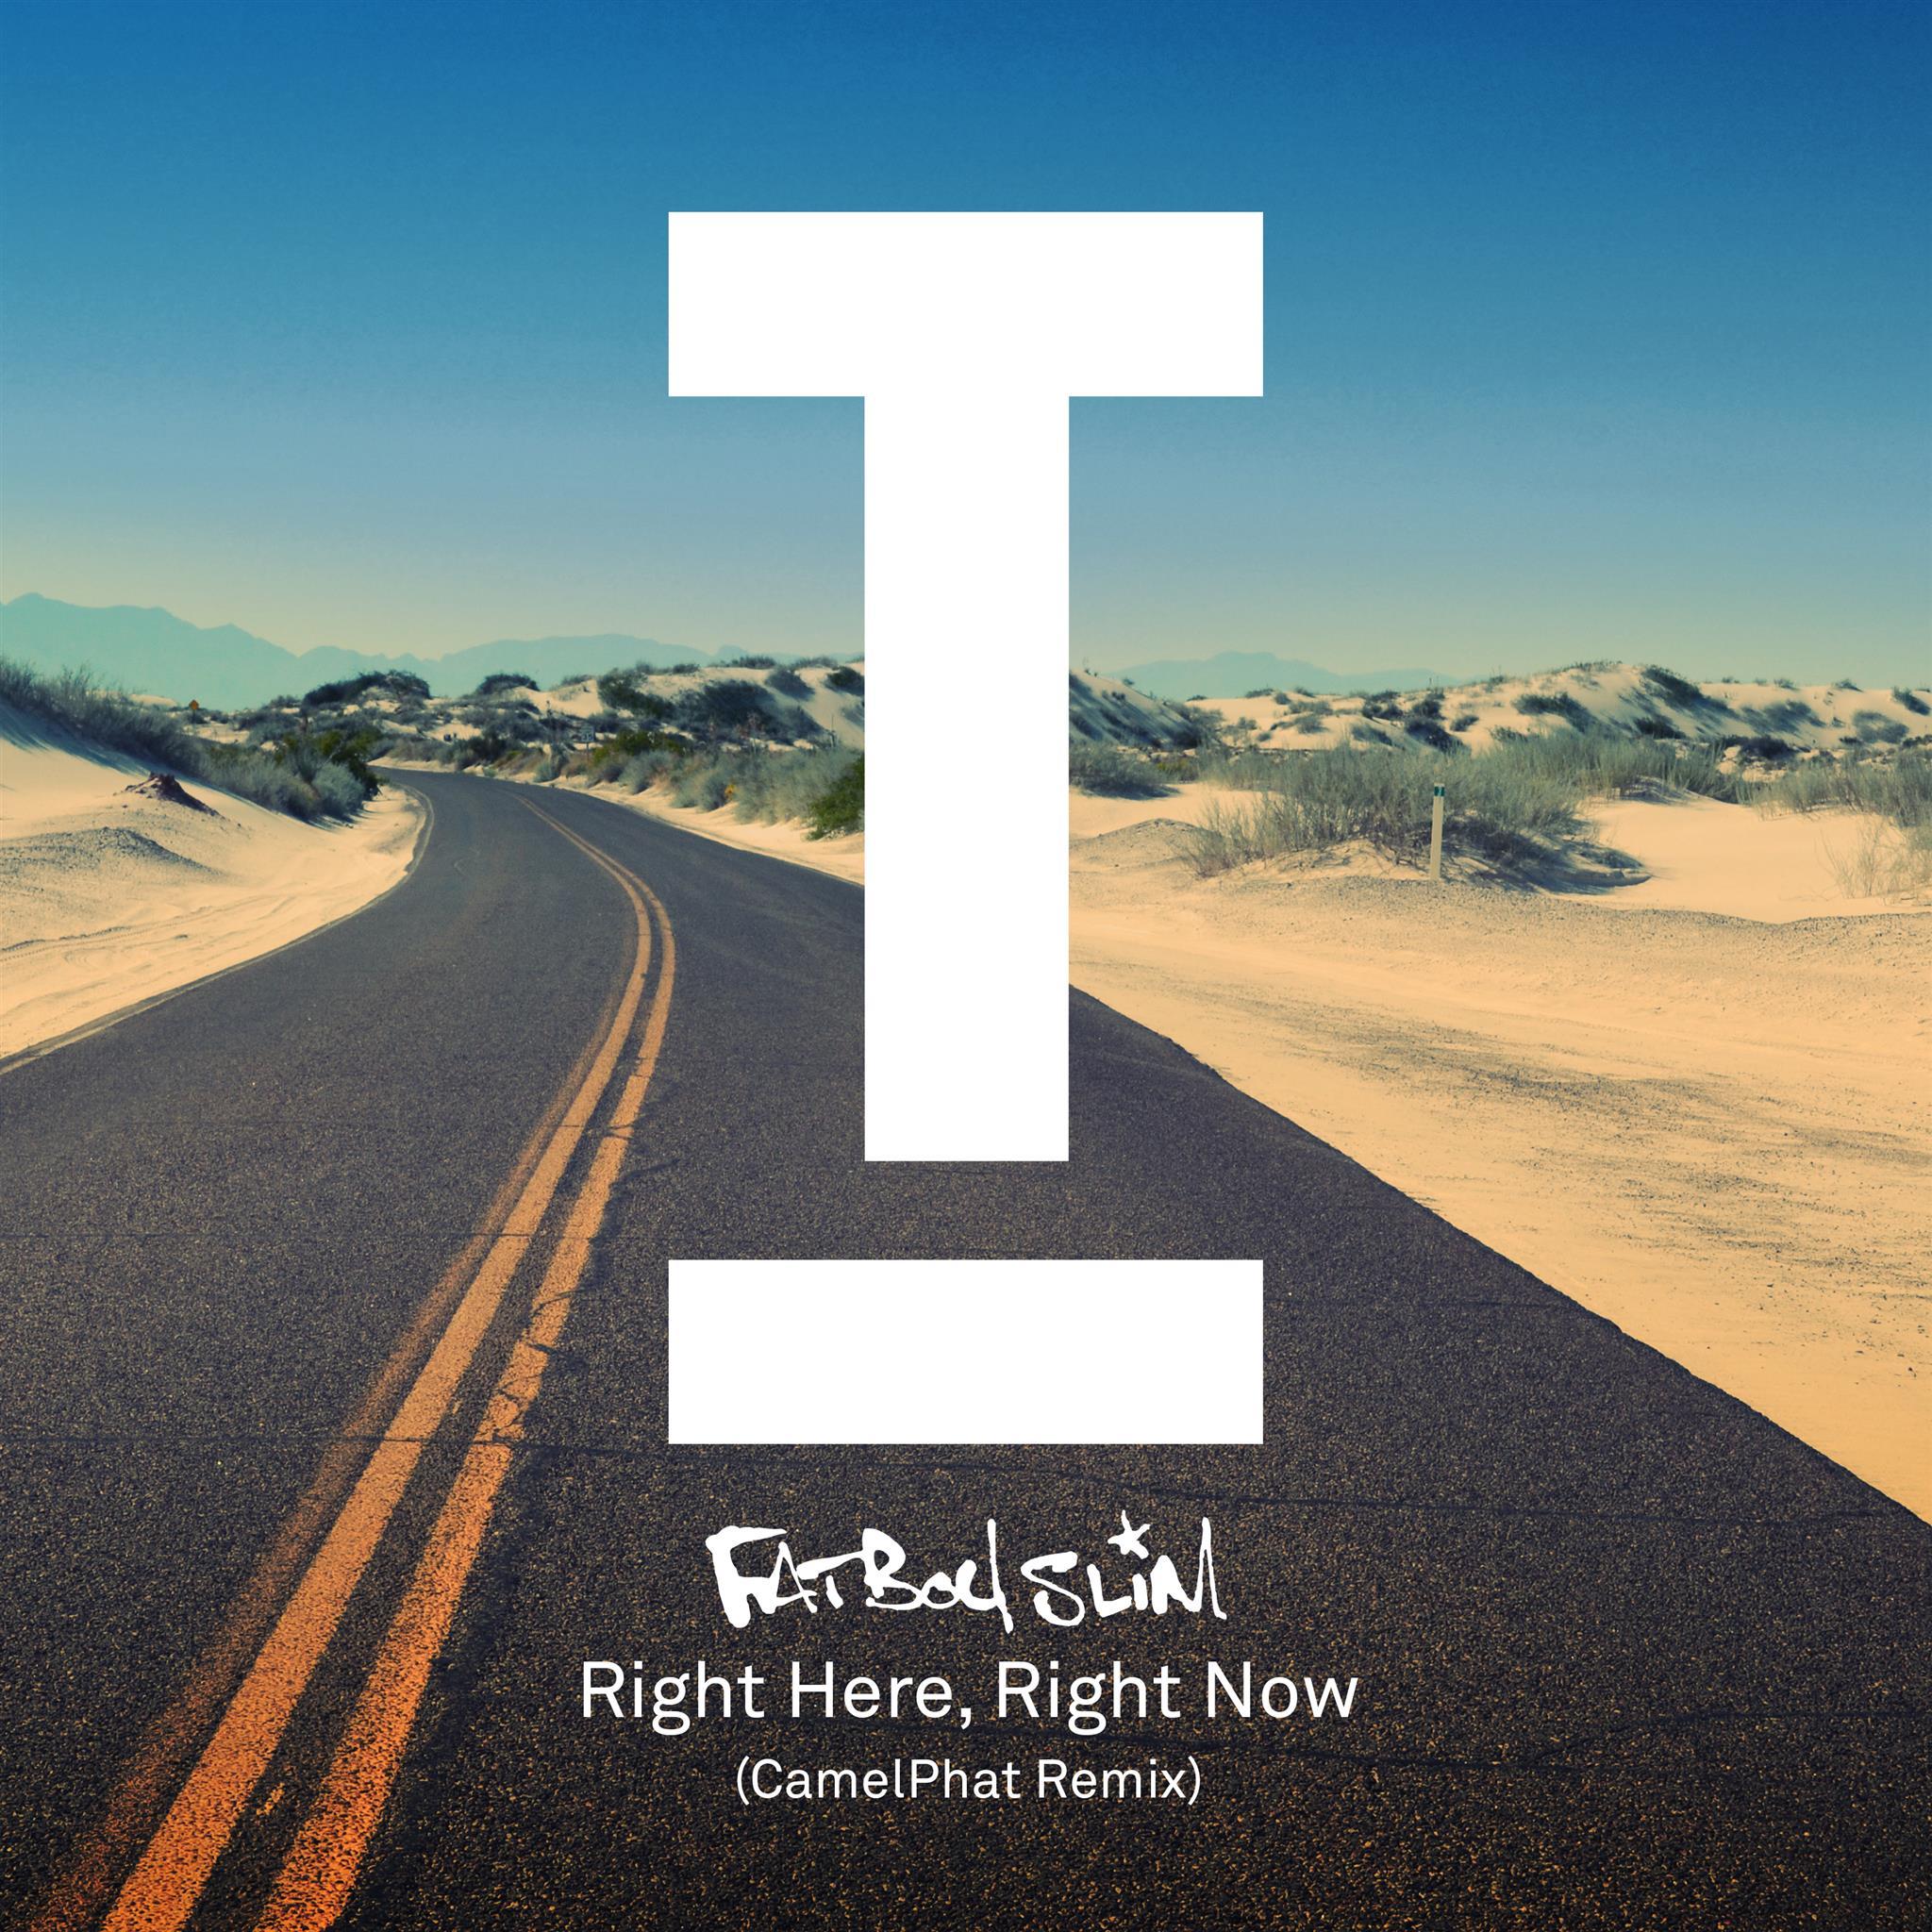 Right Here, Right Now (CamelPhat Radio Edit)